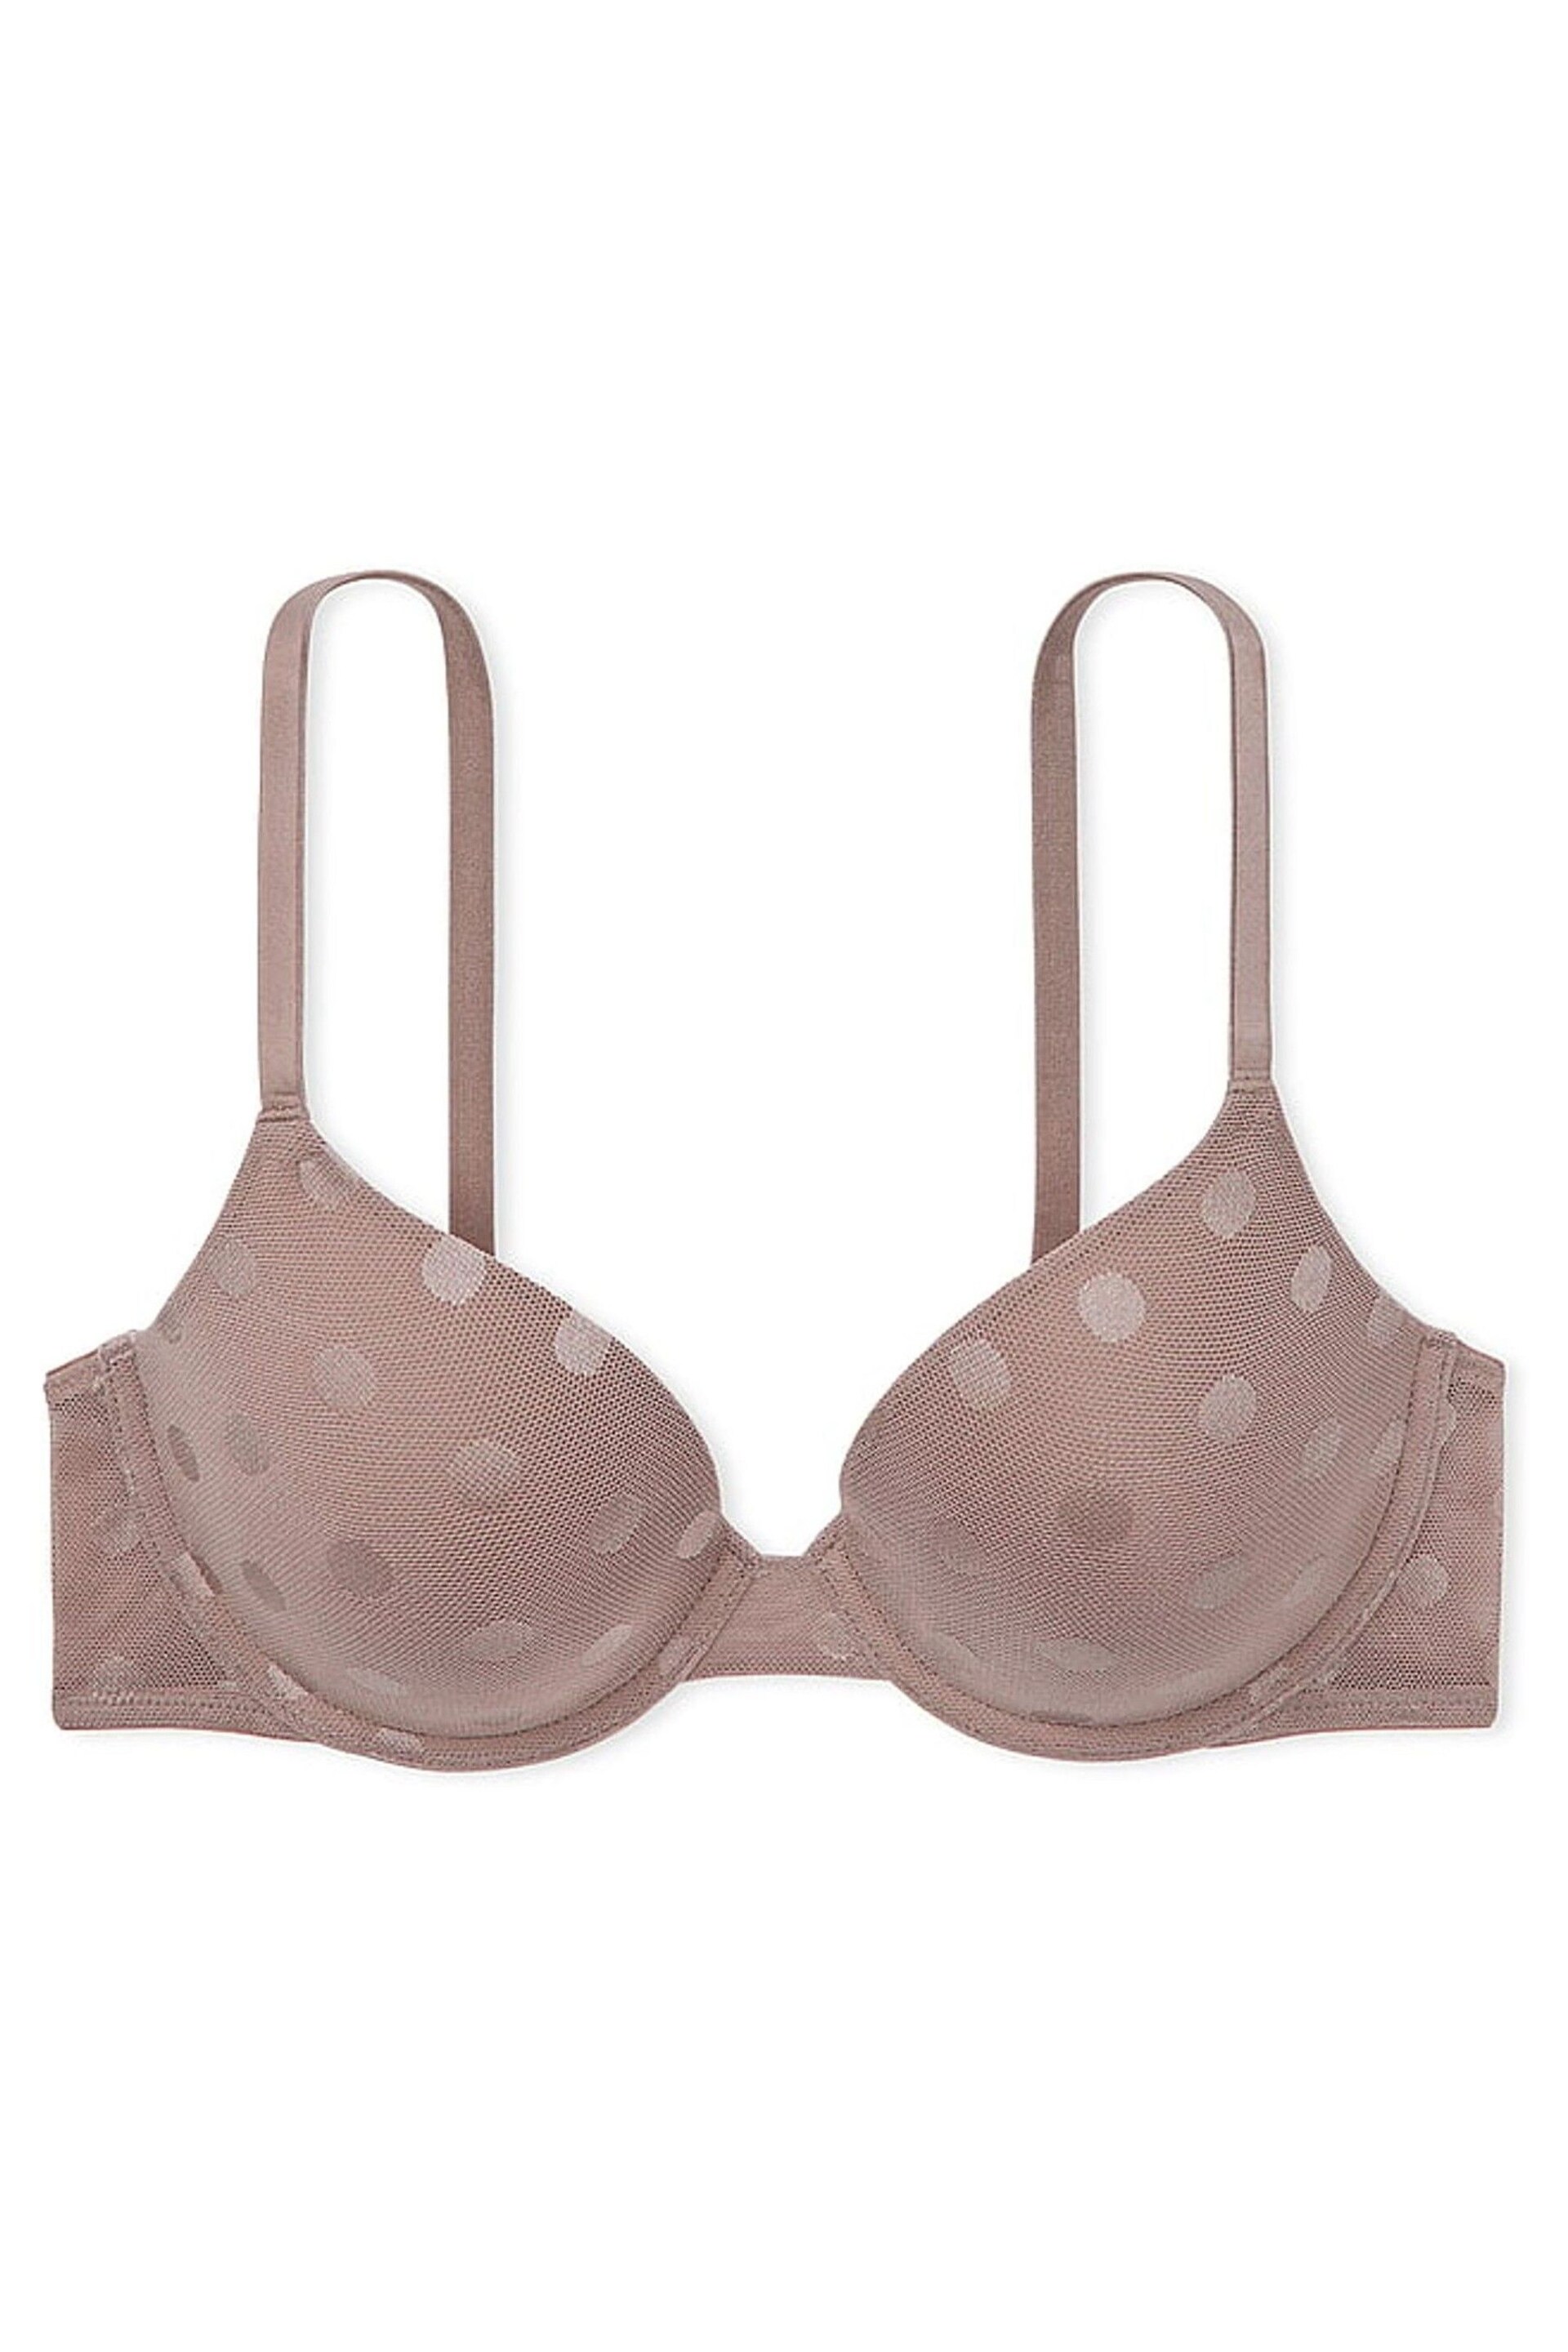 Victoria's Secret PINK Iced Coffee Brown Dot Mesh Lightly Lined Demi Bra - Image 3 of 4